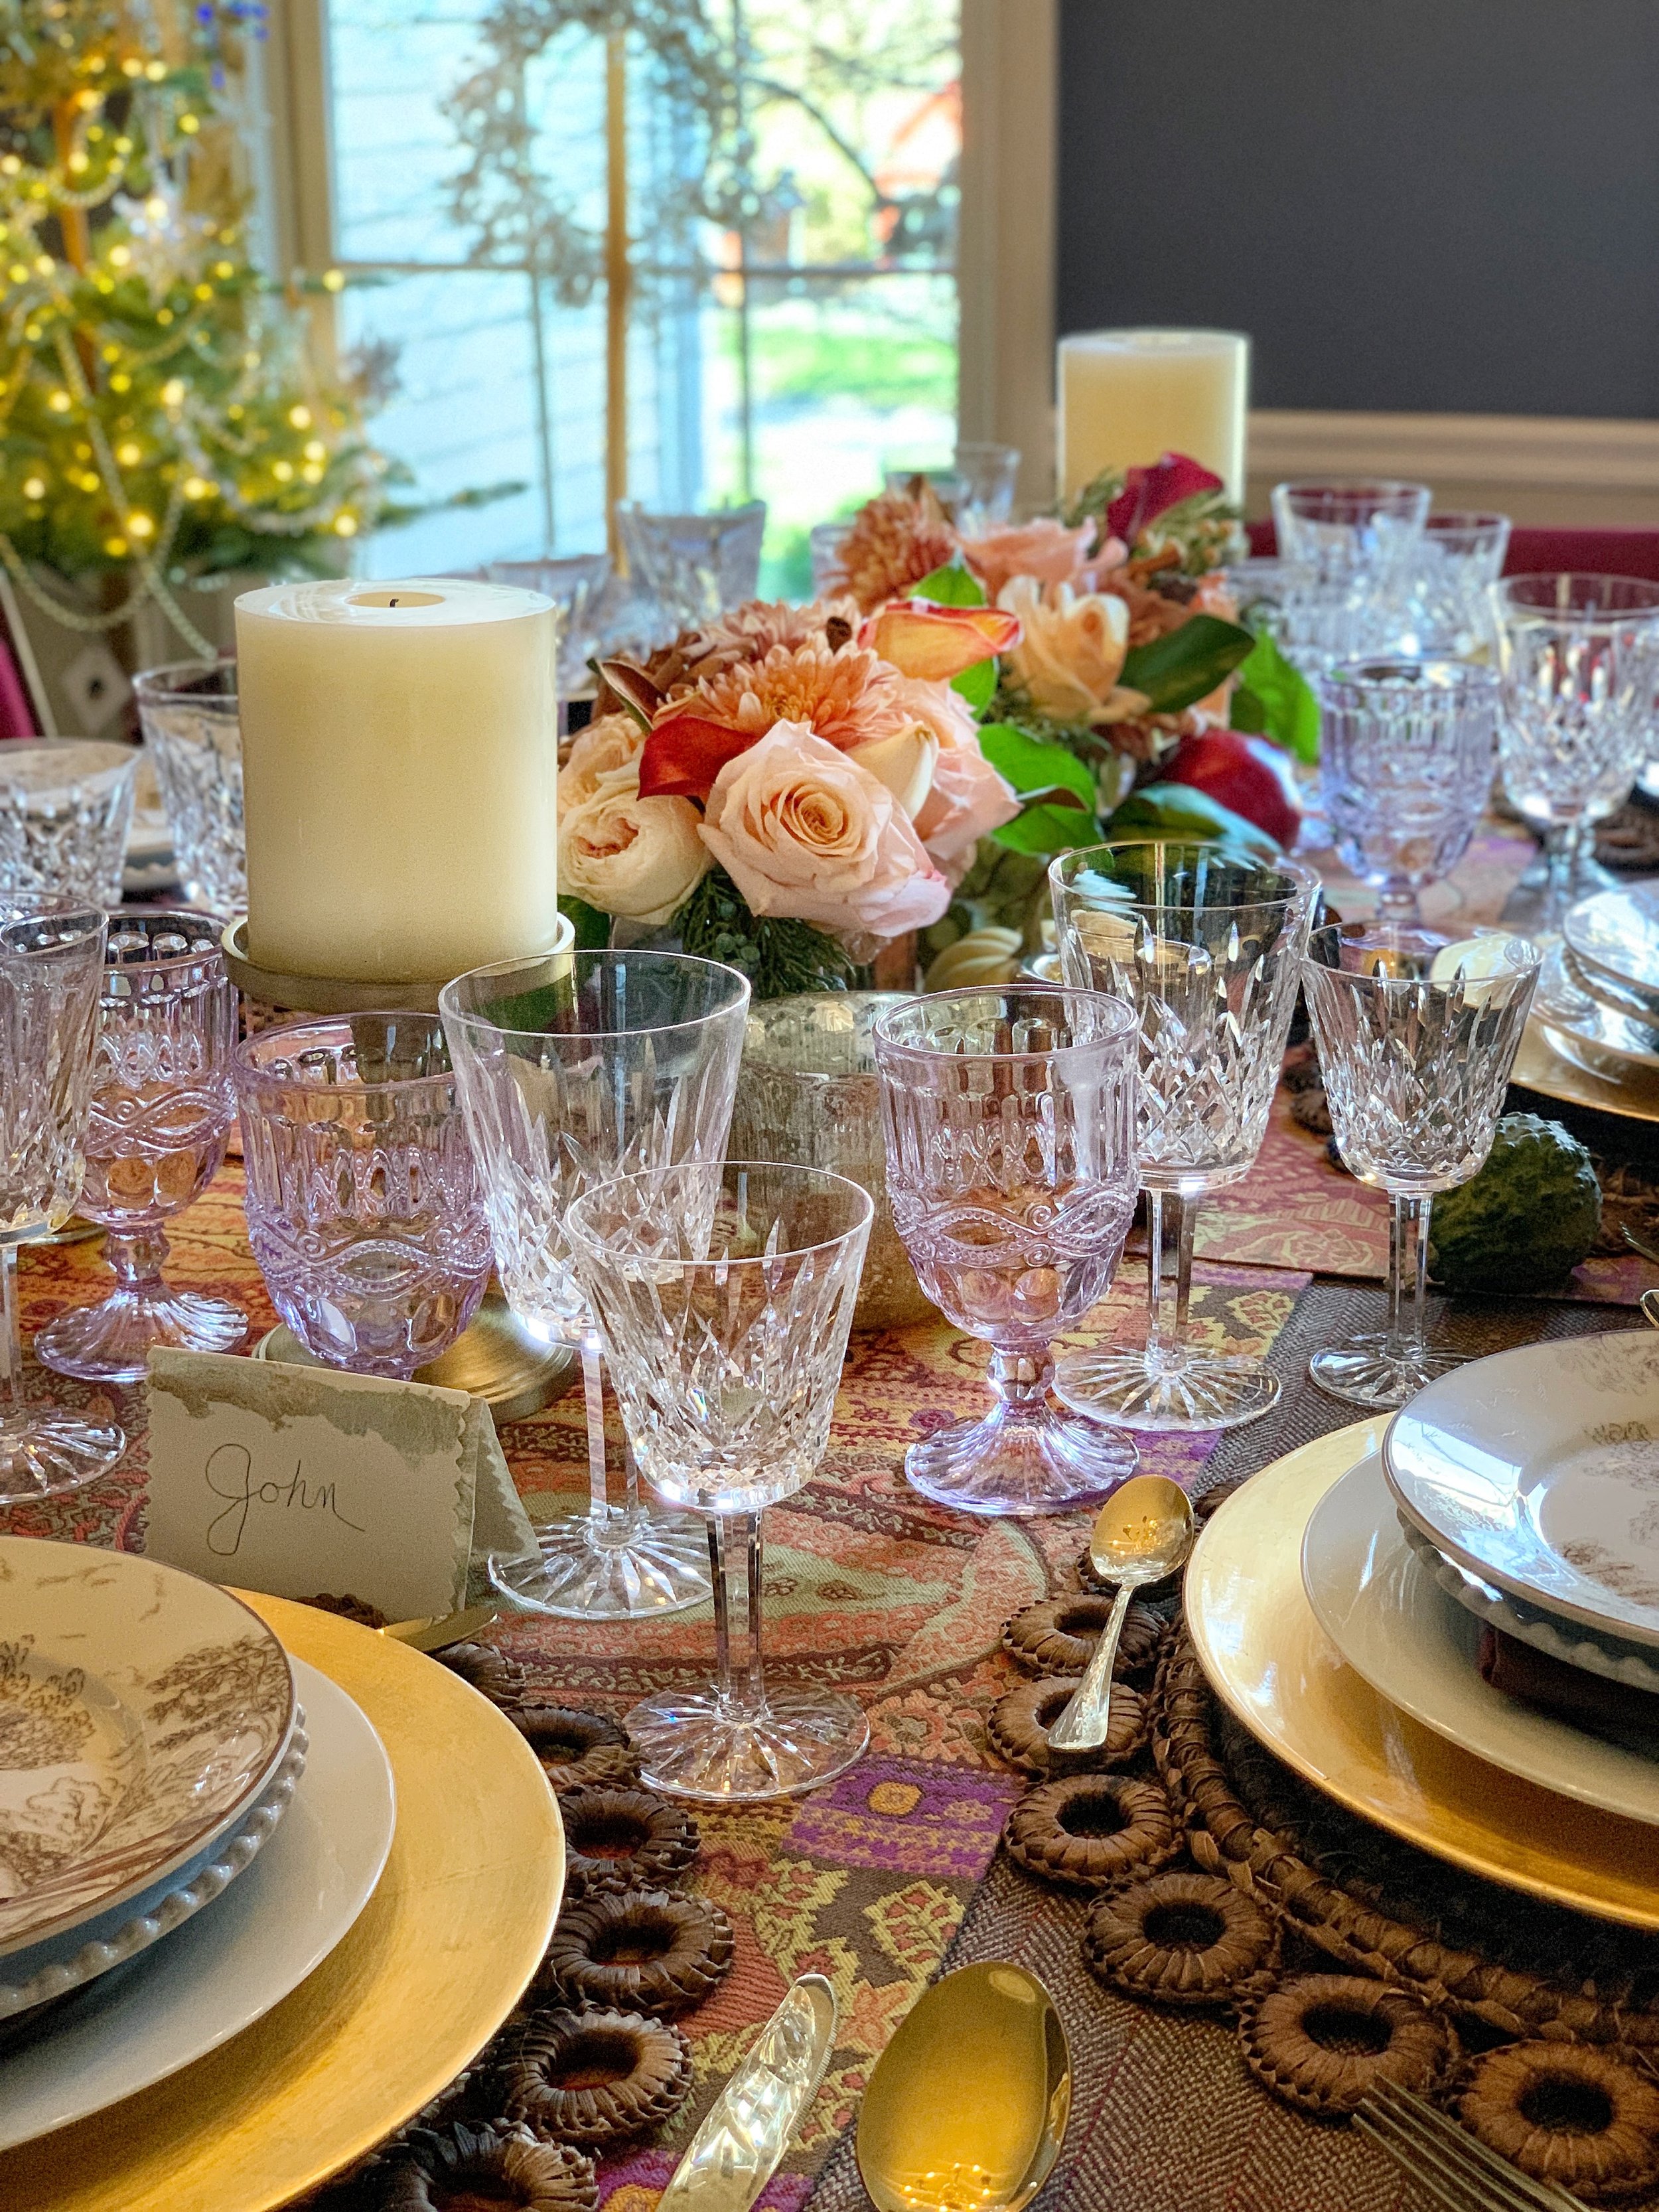 The Art of Layering a Table: Create a Stunning Tablescape for Any Occasion